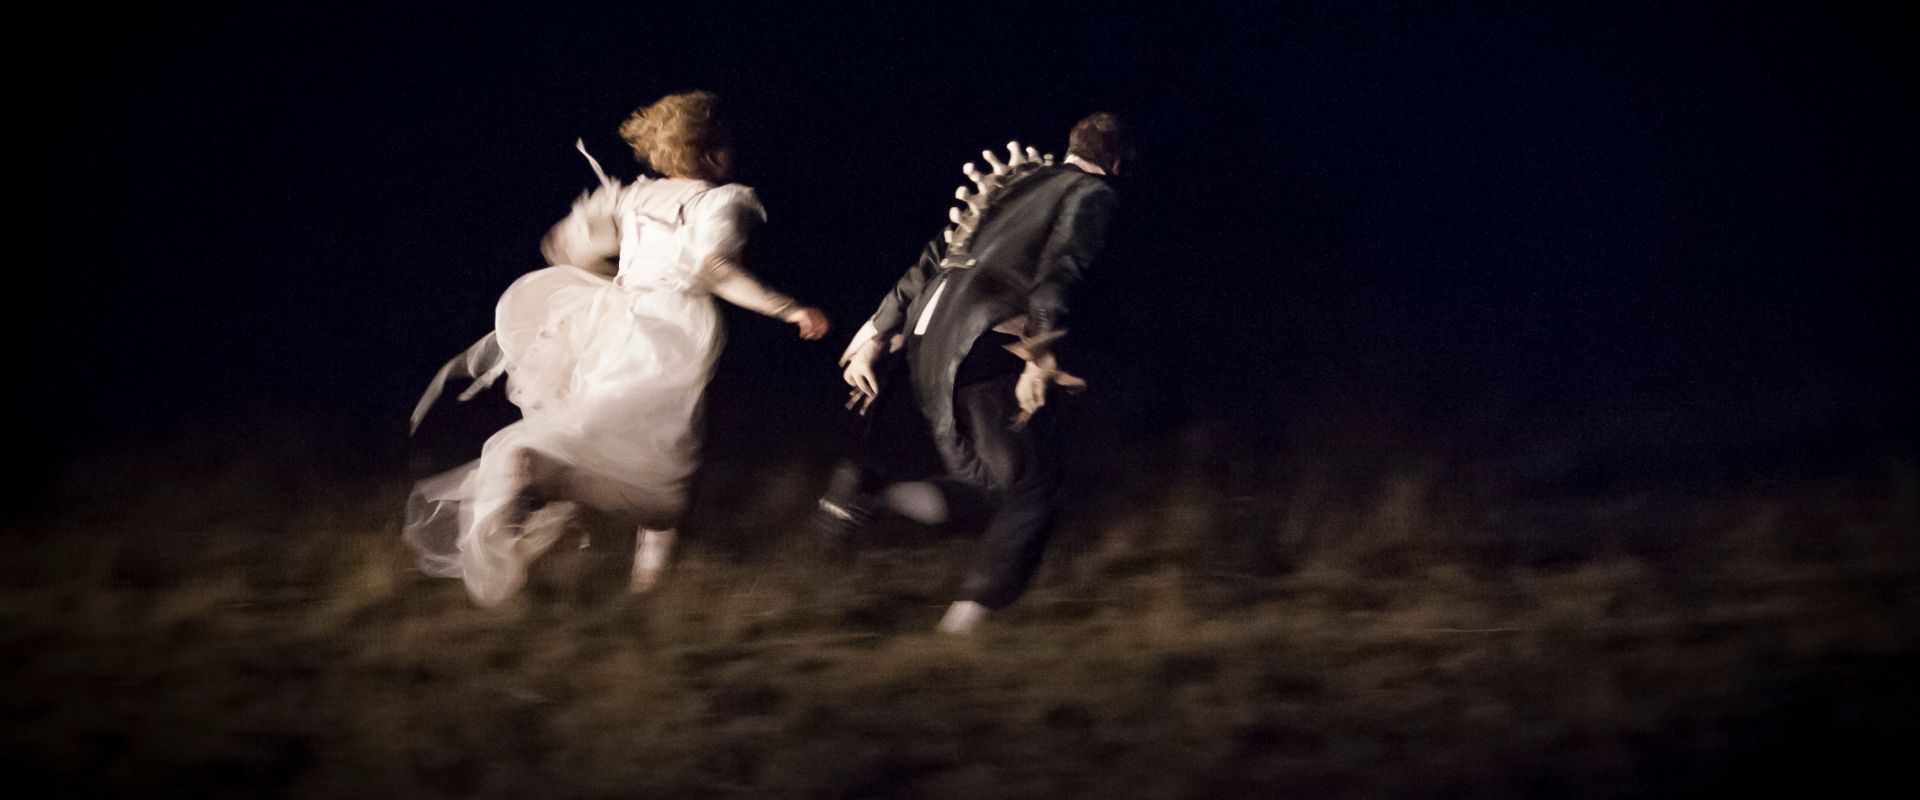 The Wolf Girl Alice, wearing a wedding dress, and The Duke in a tailcoat, an exposed animalistic spine protruding from it, run off into the darkness.